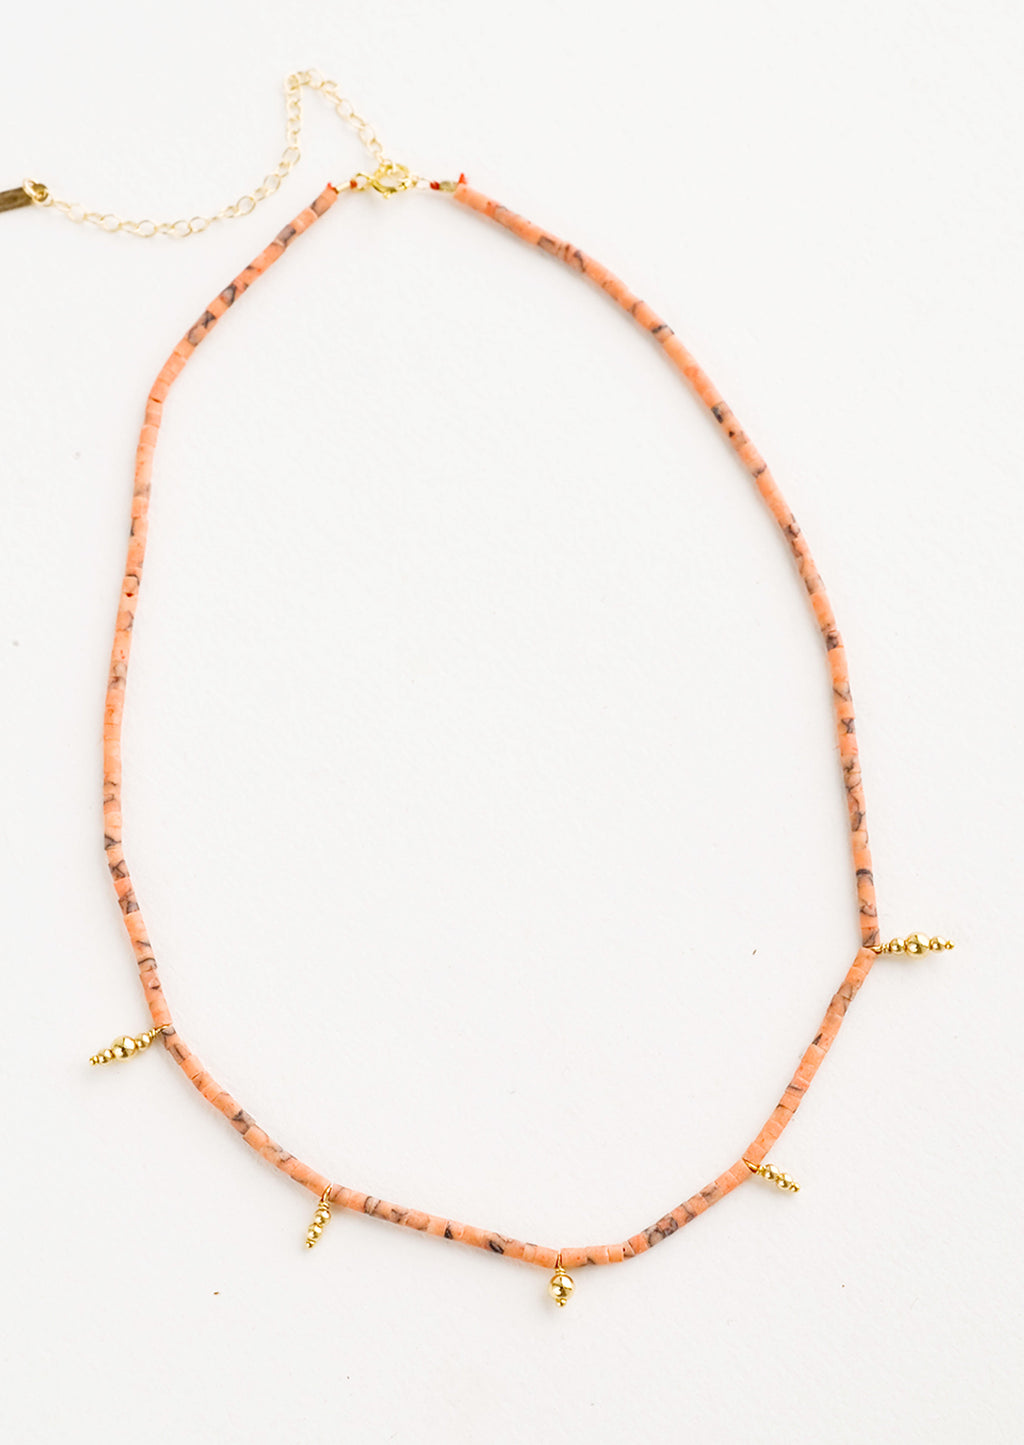 Peach: Beaded necklace with small peach and gold beads